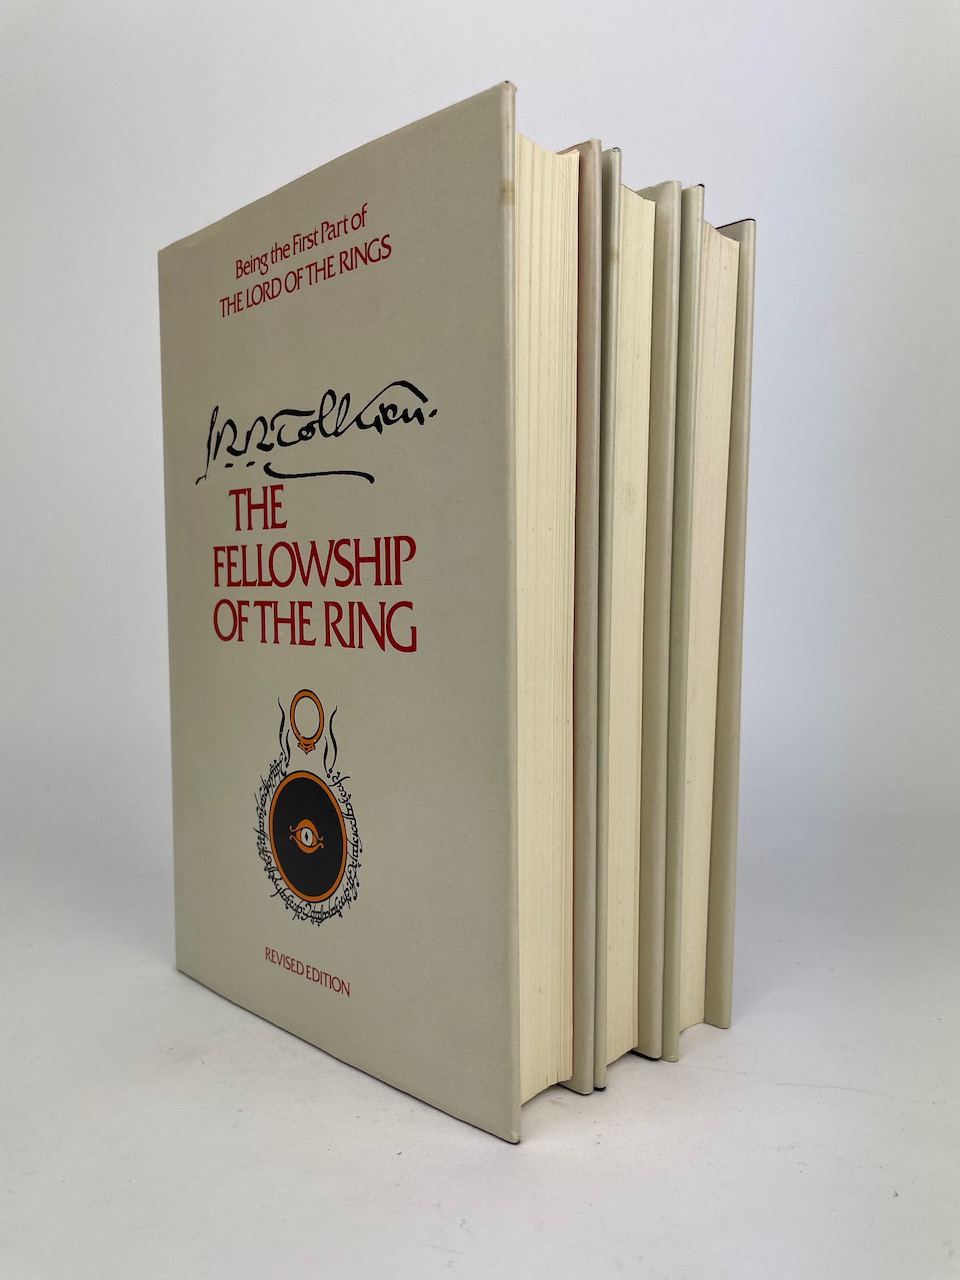 The Lord of the Rings JRR Tolkien Signature set from 1978, by Houghton Mifflin 13